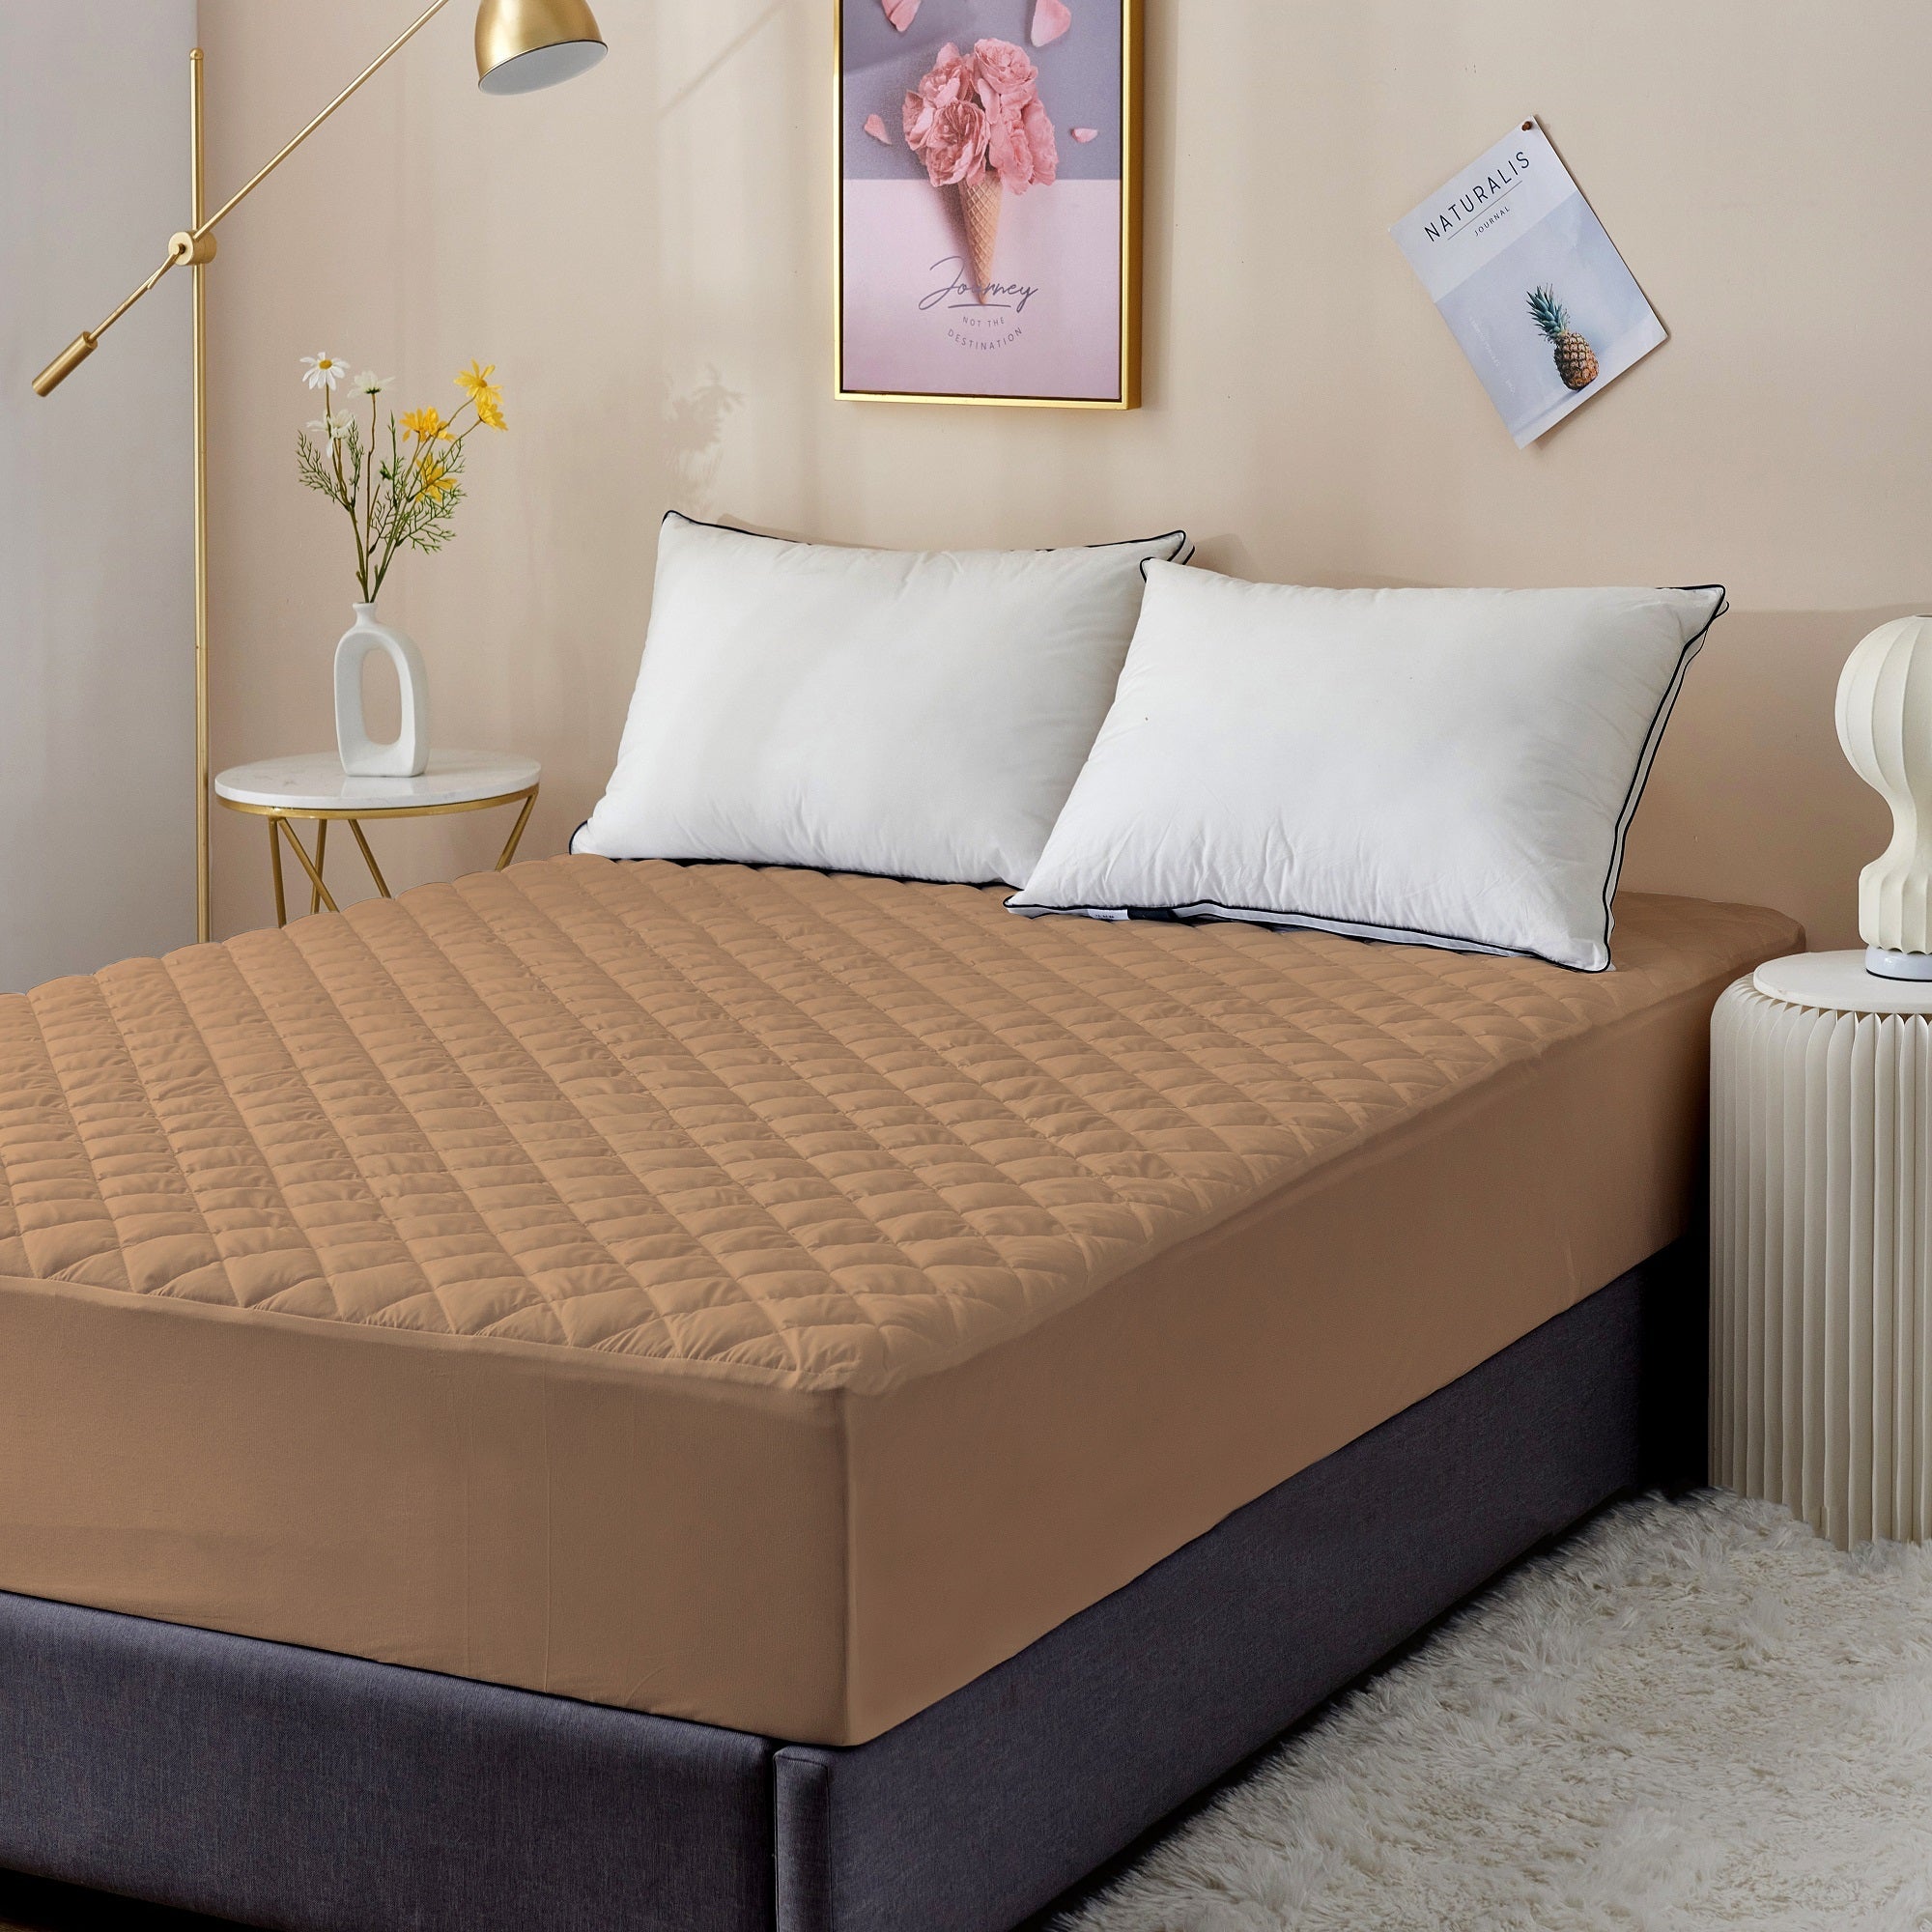 Waterproof Mattress Protector with 360 Degree Elastic Strap, Premium Quilted Sapphire (Beige, Available in 16 Sizes) - Dream Care Furnishings Private Limited